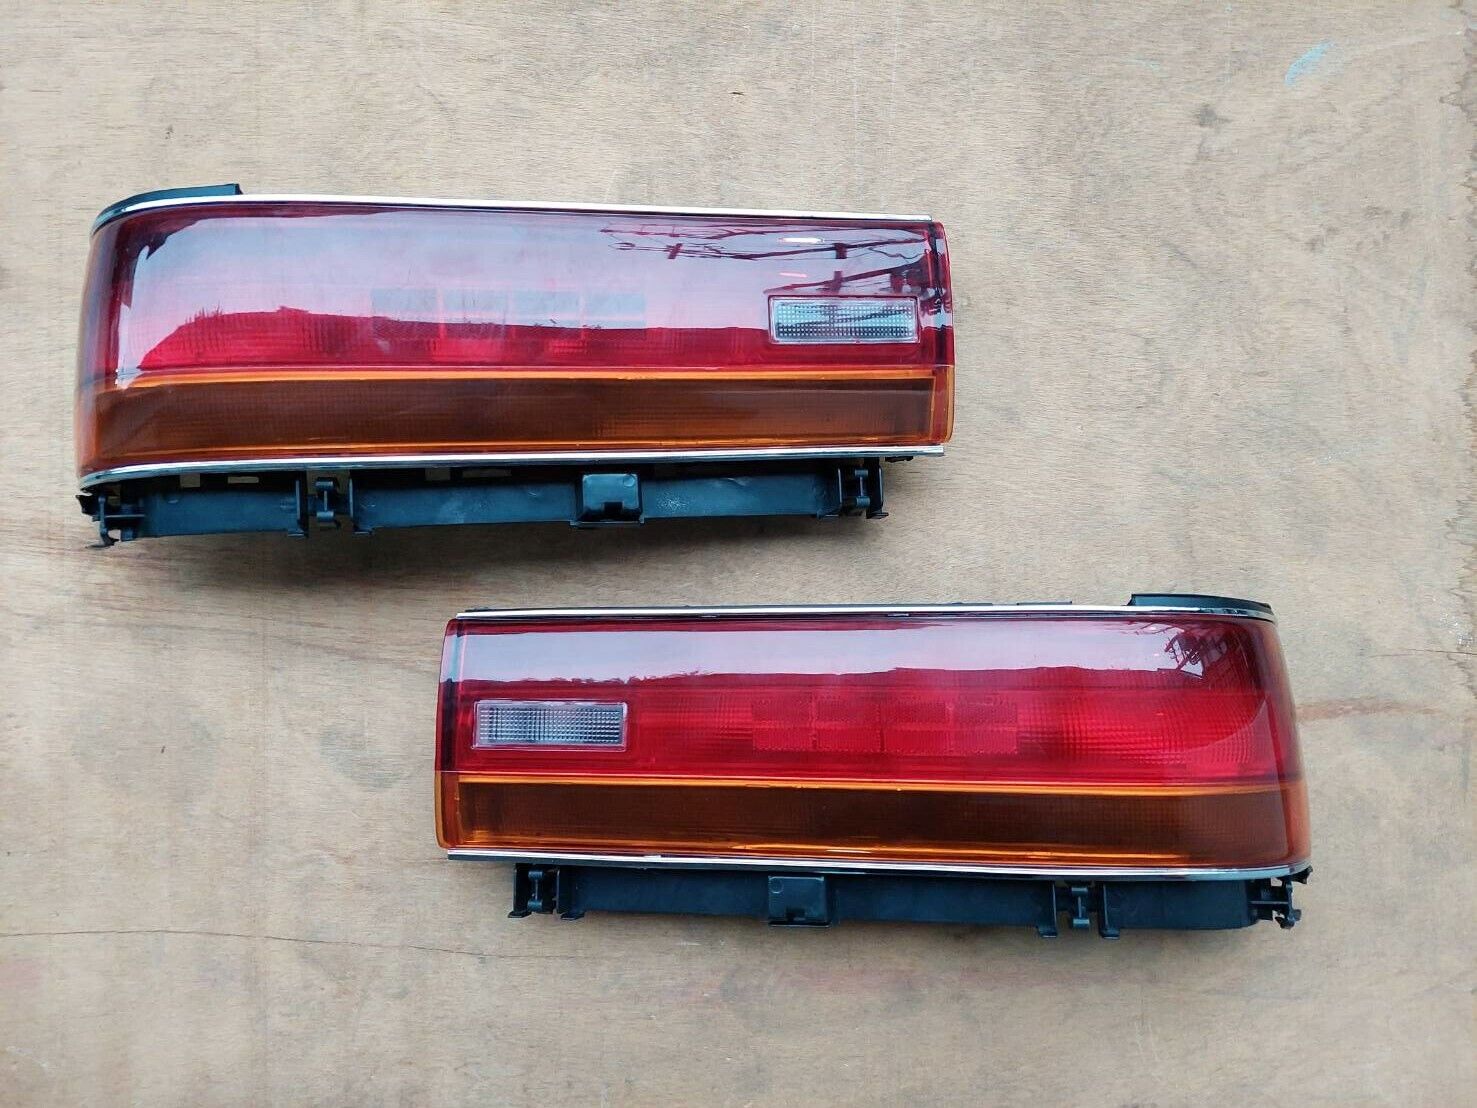 Fit For Toyota Cressida RX80 GX81 MARK 2 1991 Tail Light Rear Lamp Pair